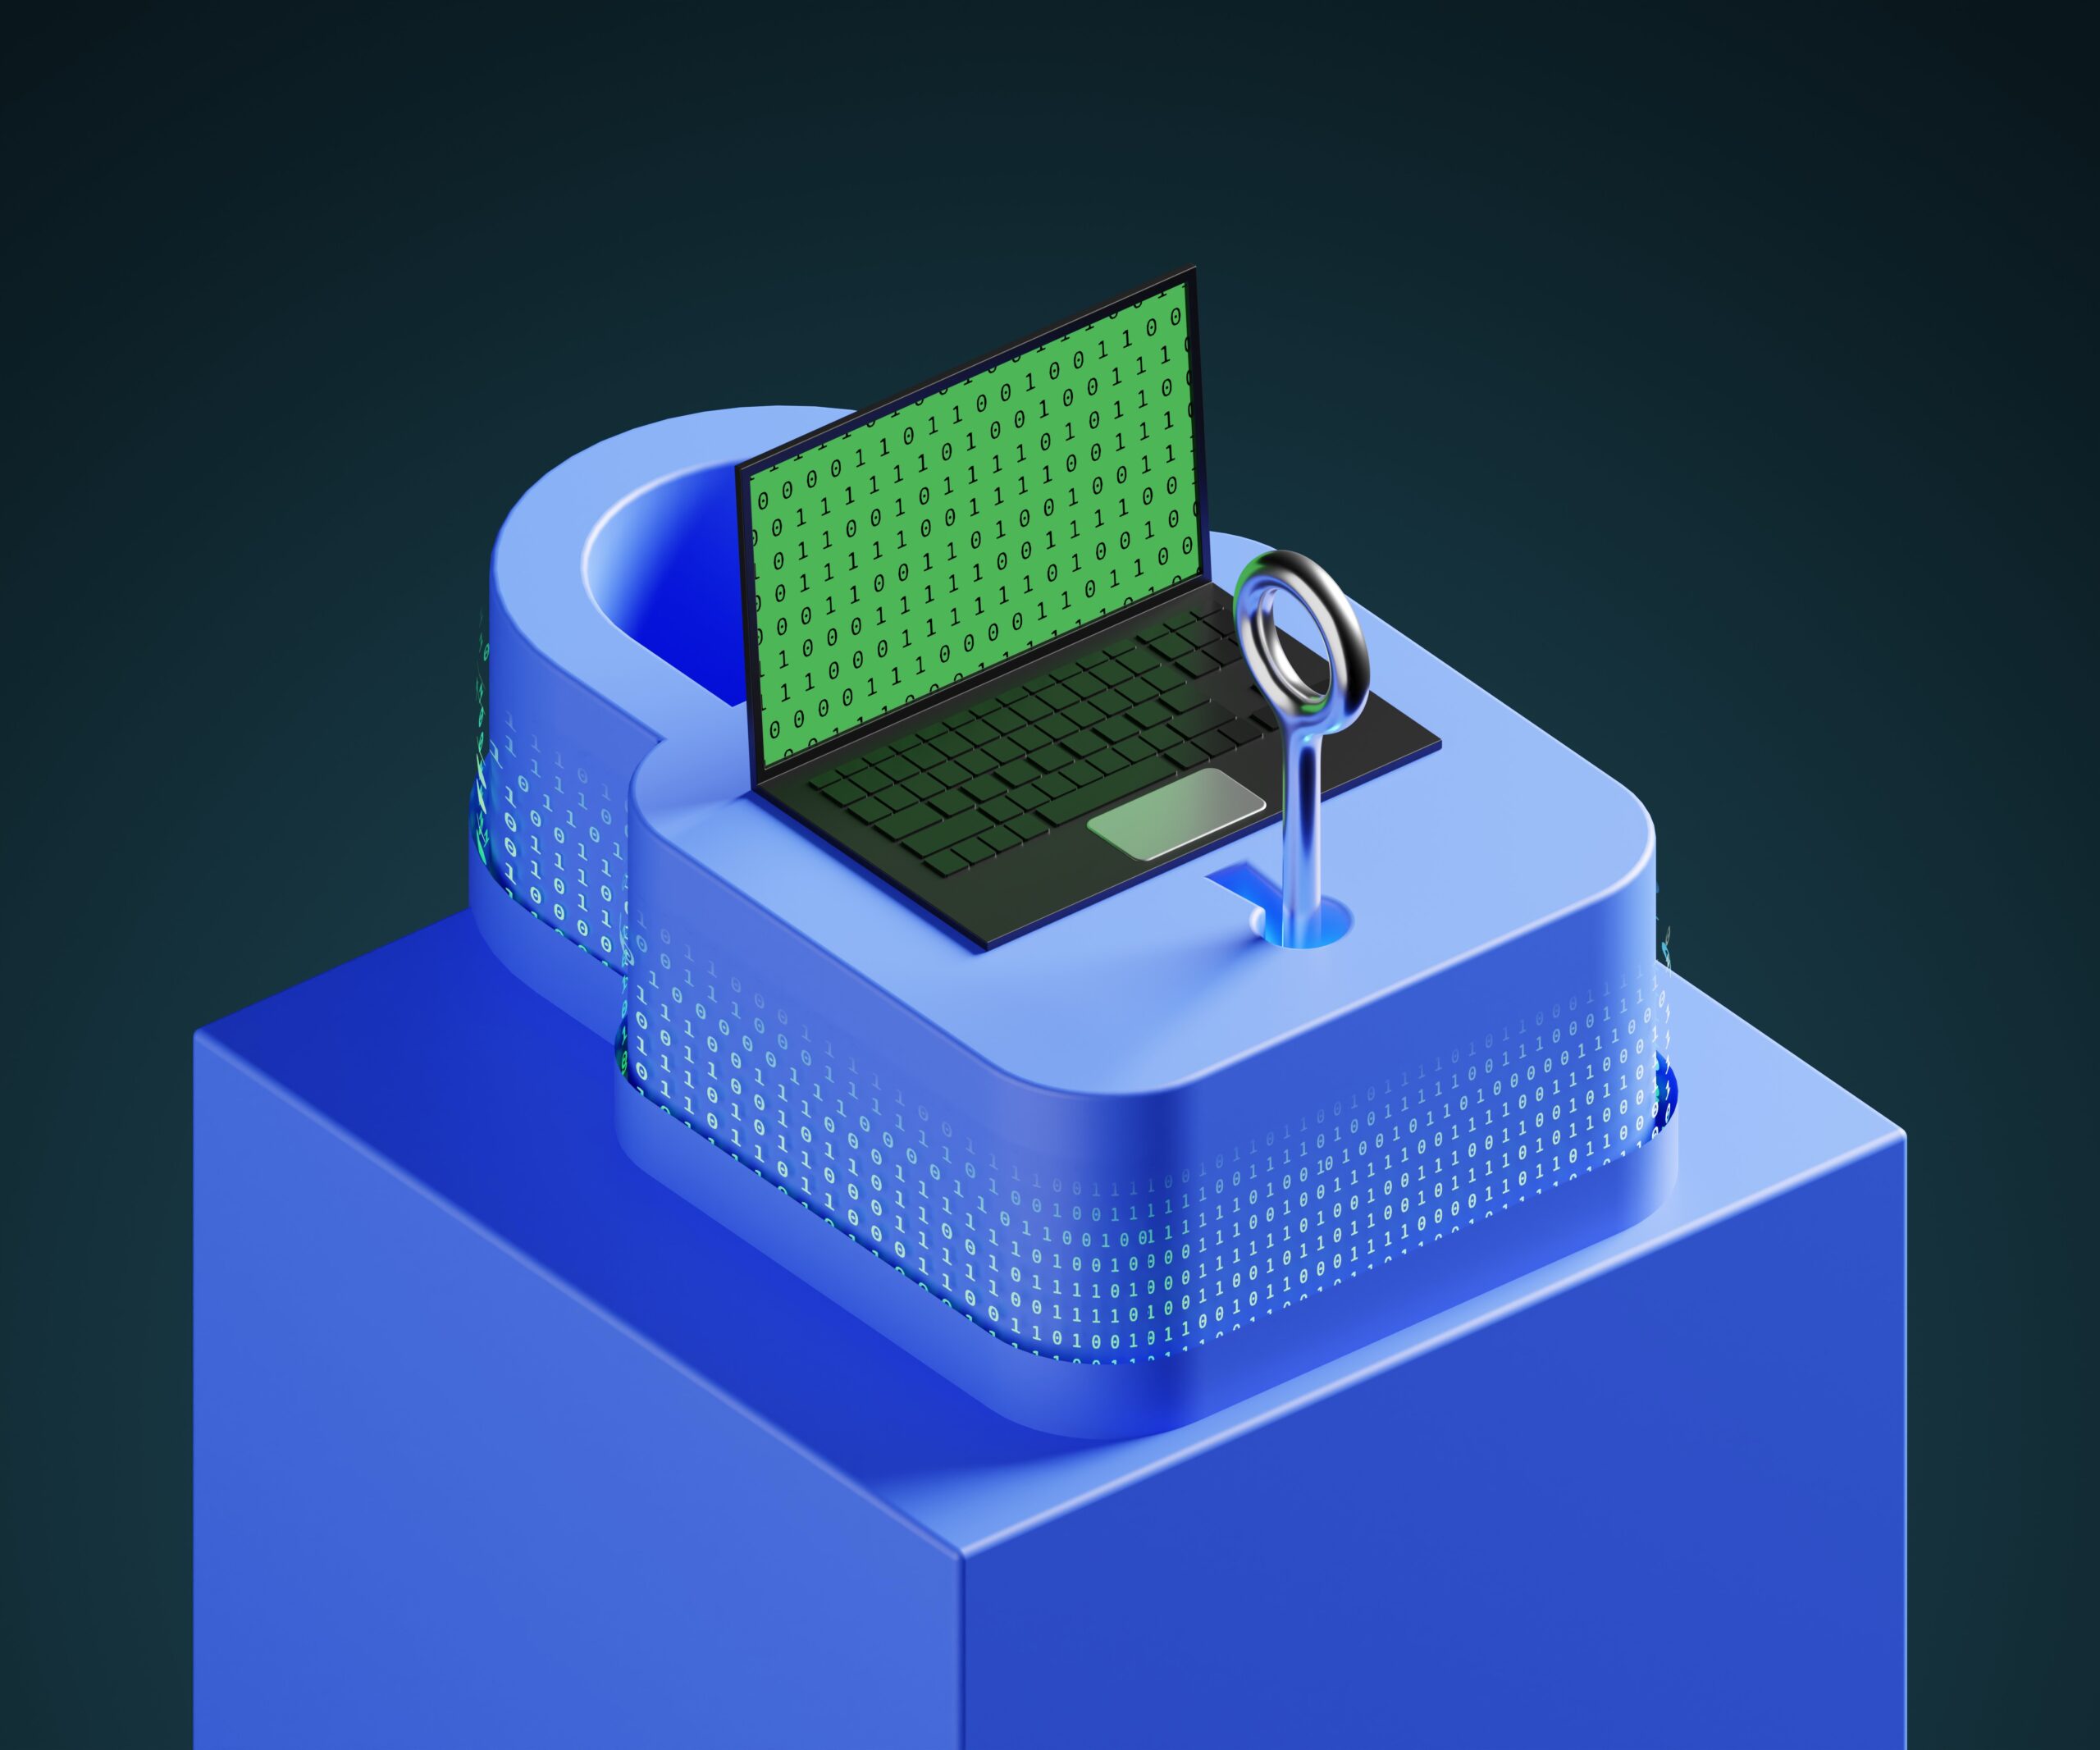 Graphic of a laptop on top of a lock and key representing methods to secure data.